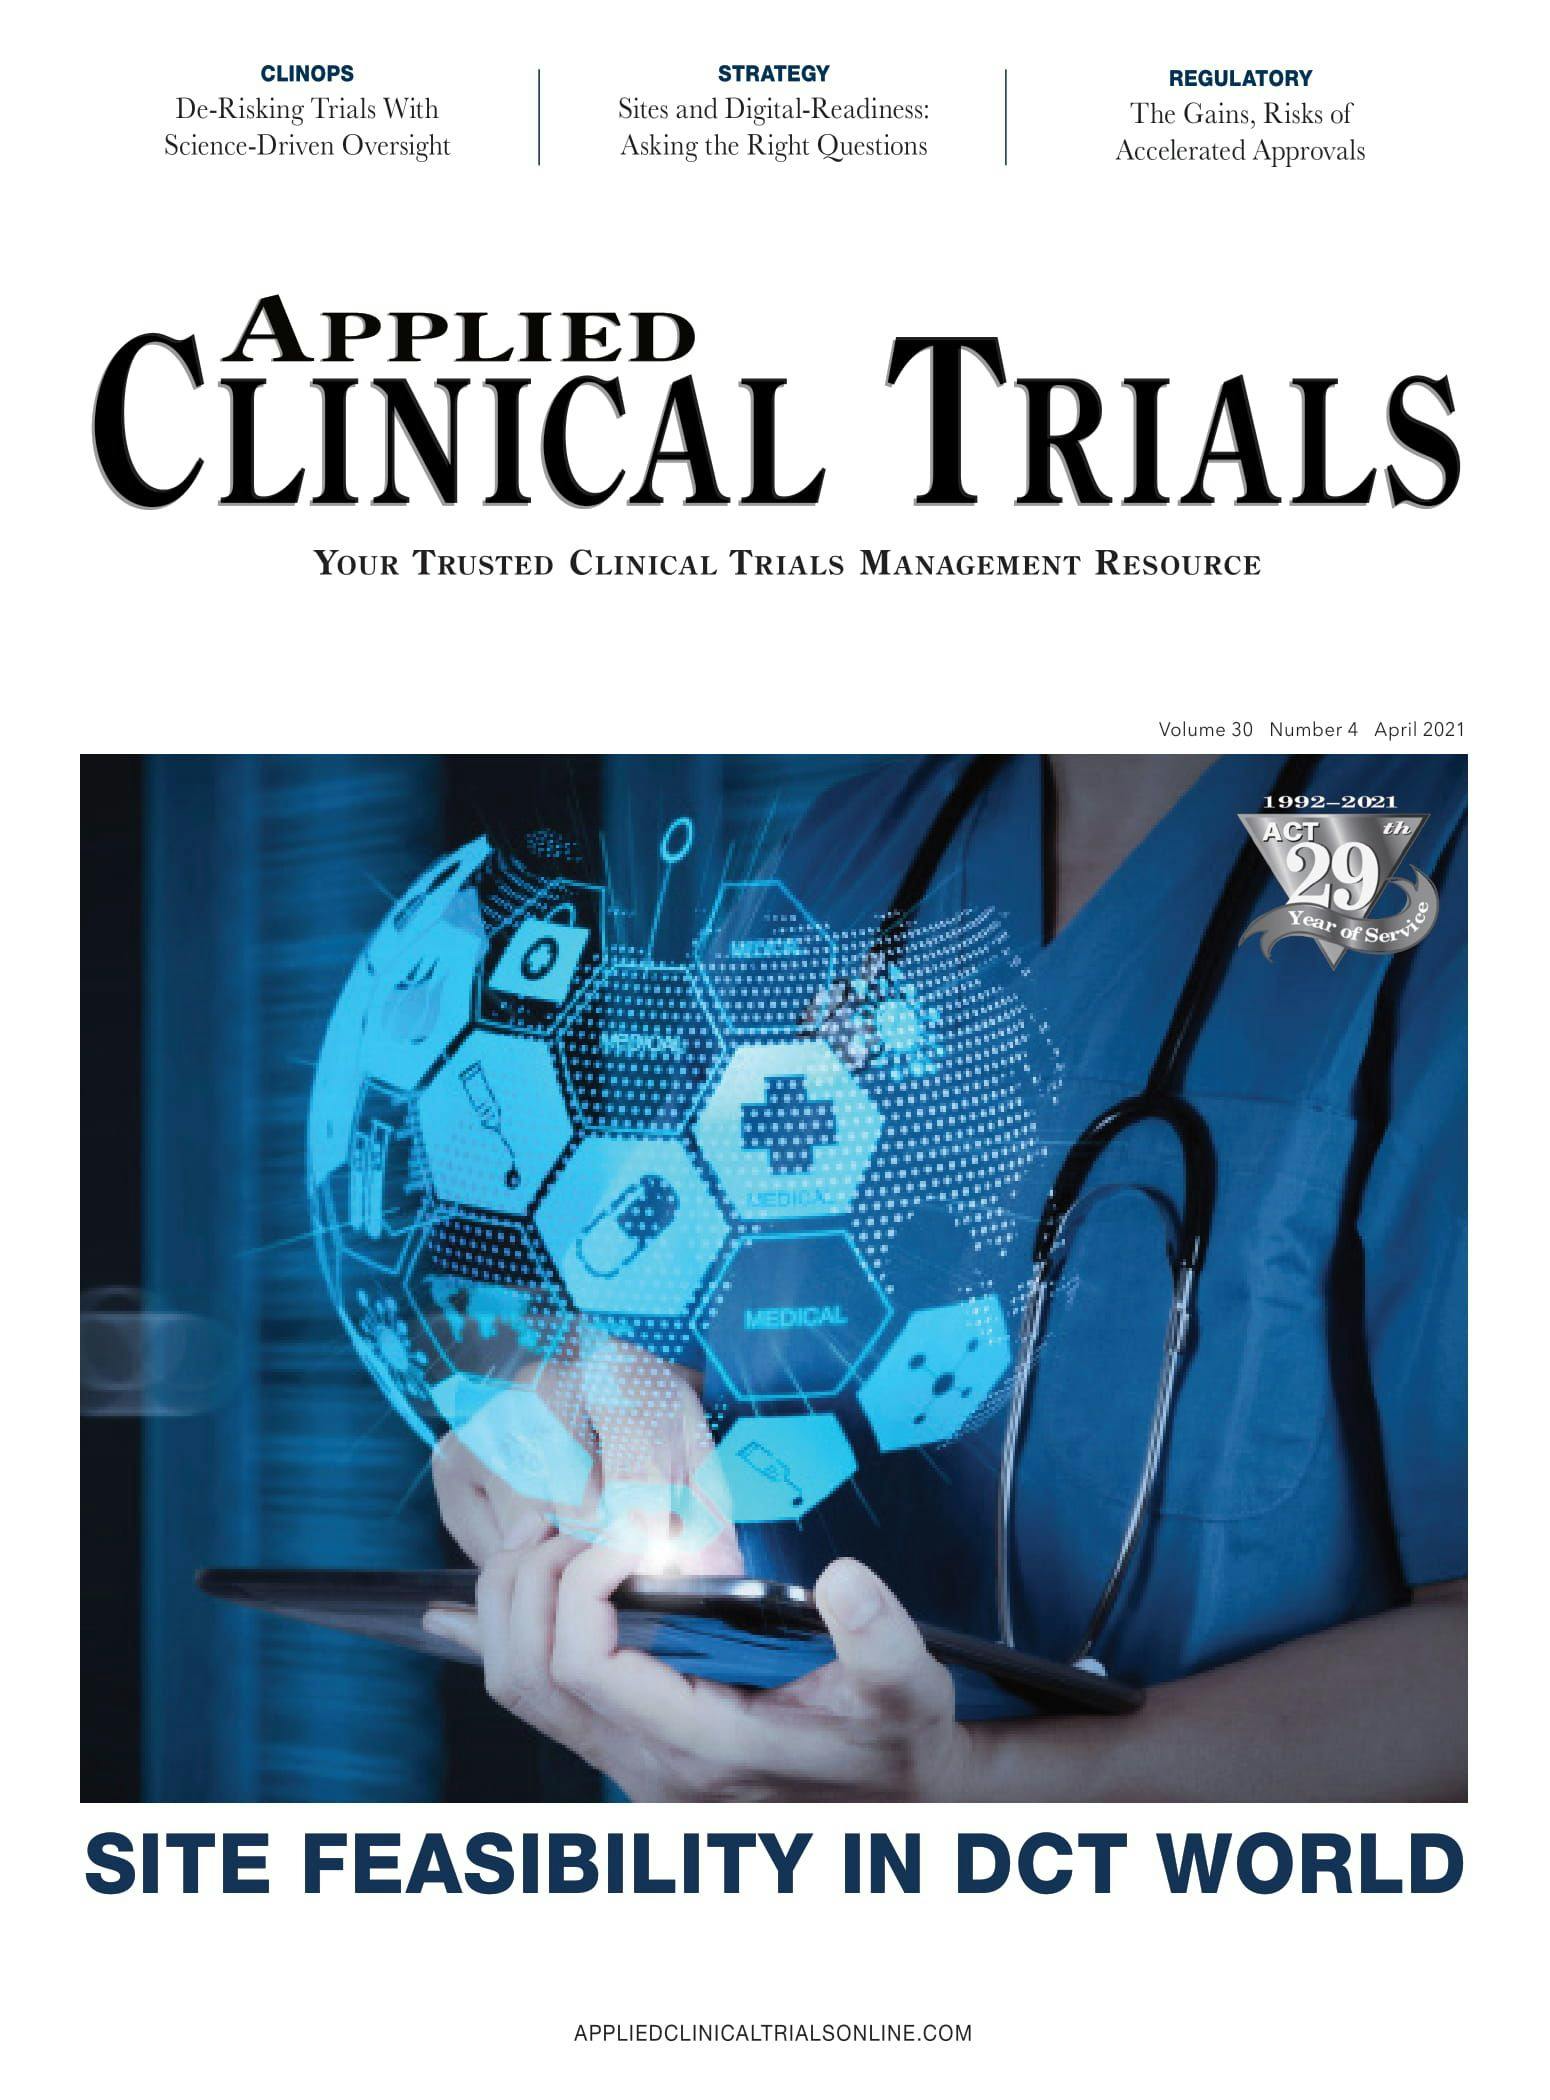 Applied Clinical Trials-04-01-2021